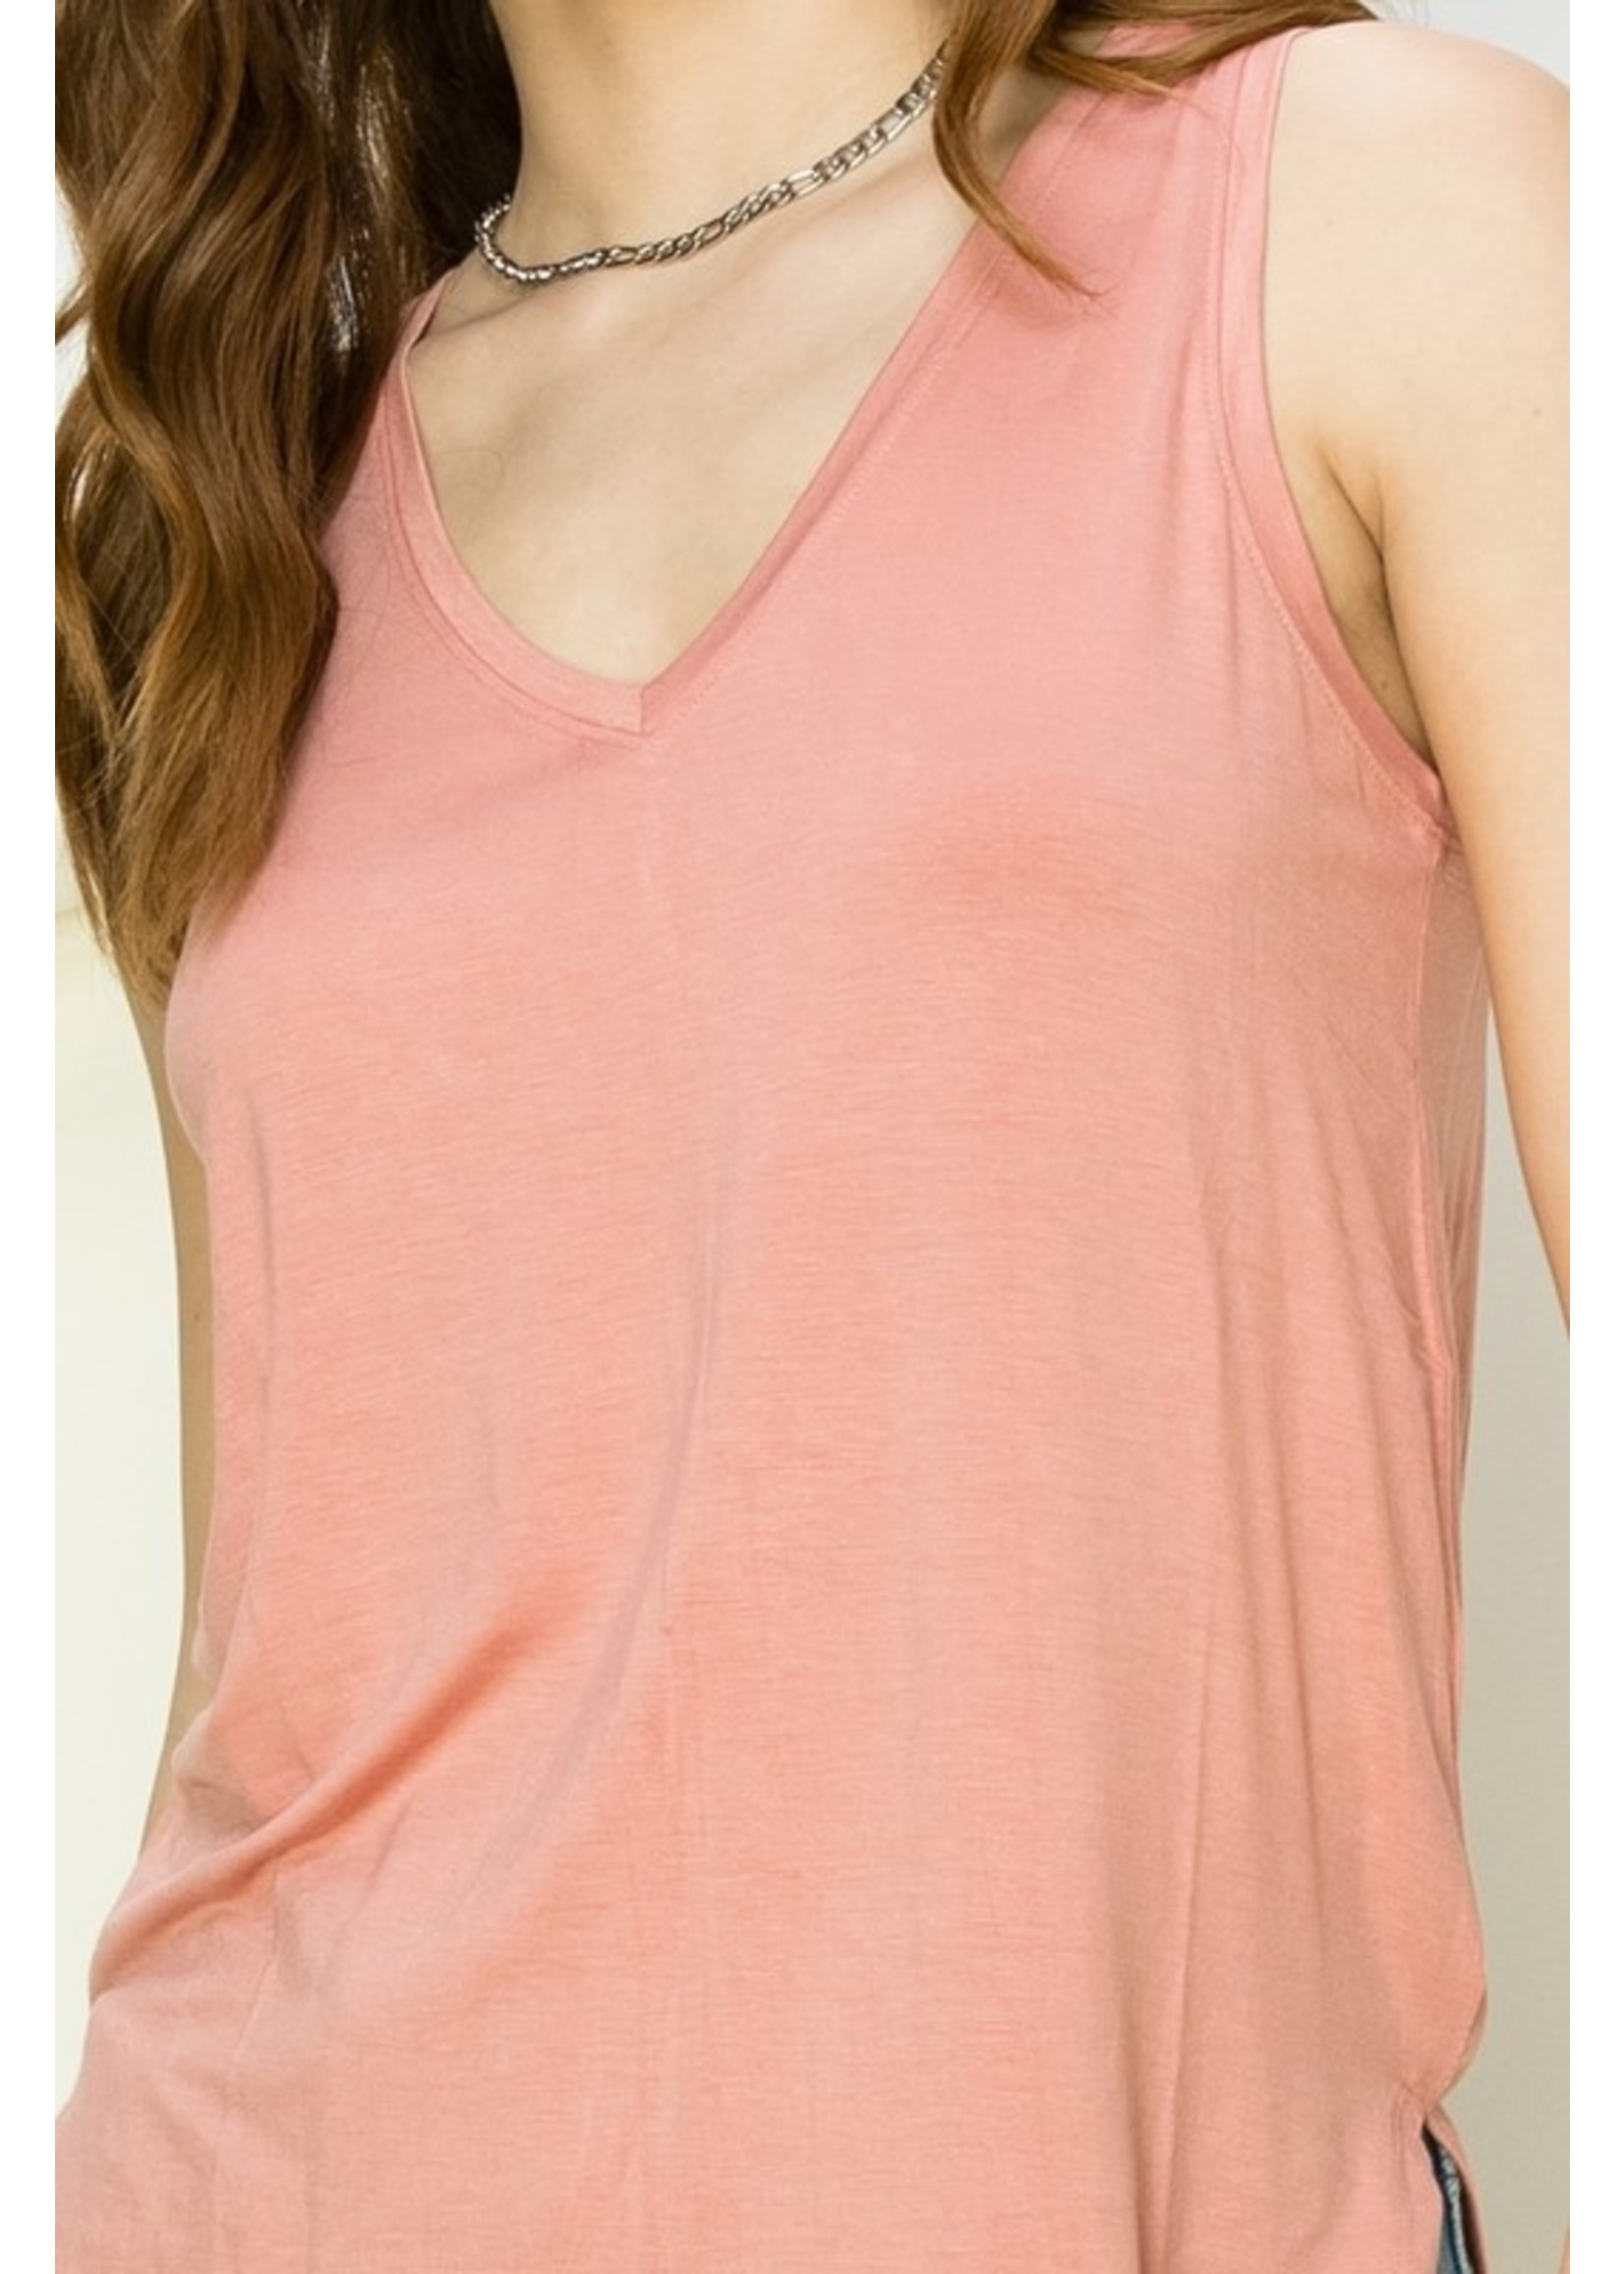 The Call Me Yours V-Neck Tank